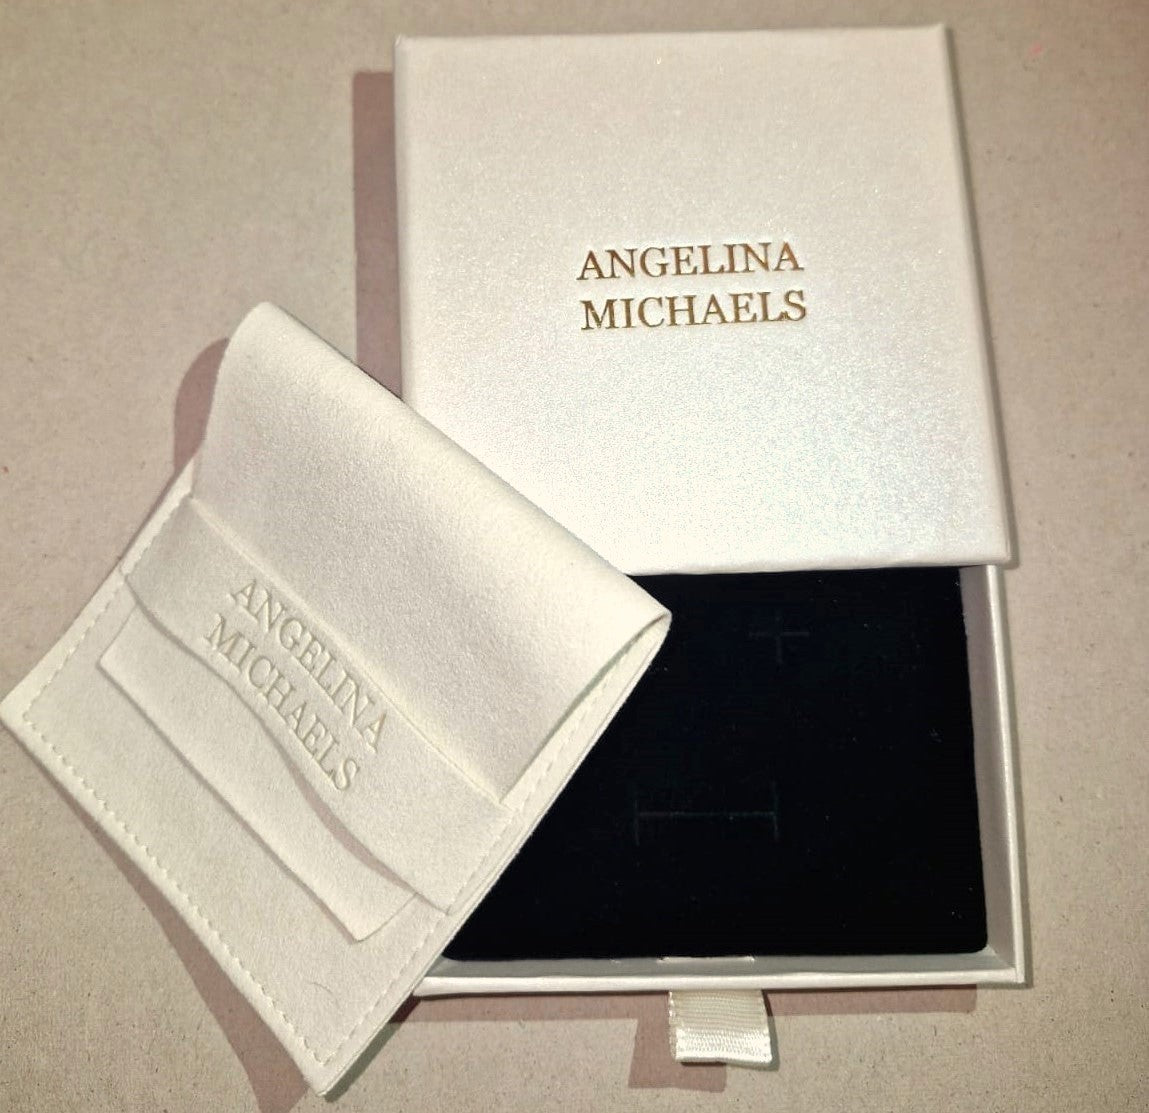 Angelina Michaels Packaging